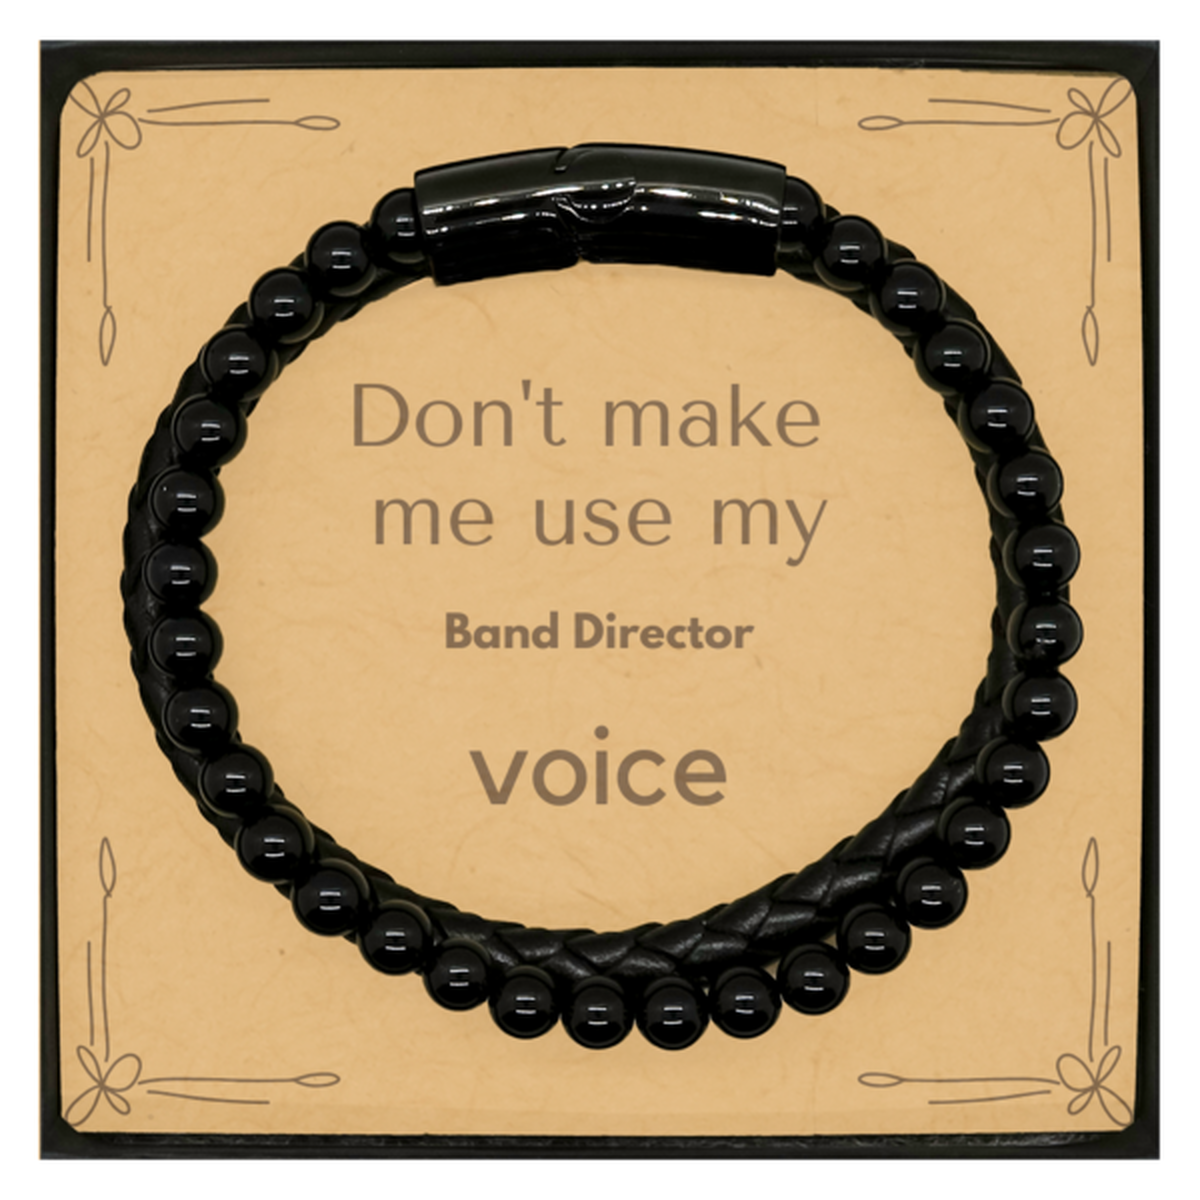 Don't make me use my Band Director voice, Sarcasm Band Director Card Gifts, Christmas Band Director Stone Leather Bracelets Birthday Unique Gifts For Band Director Coworkers, Men, Women, Colleague, Friends